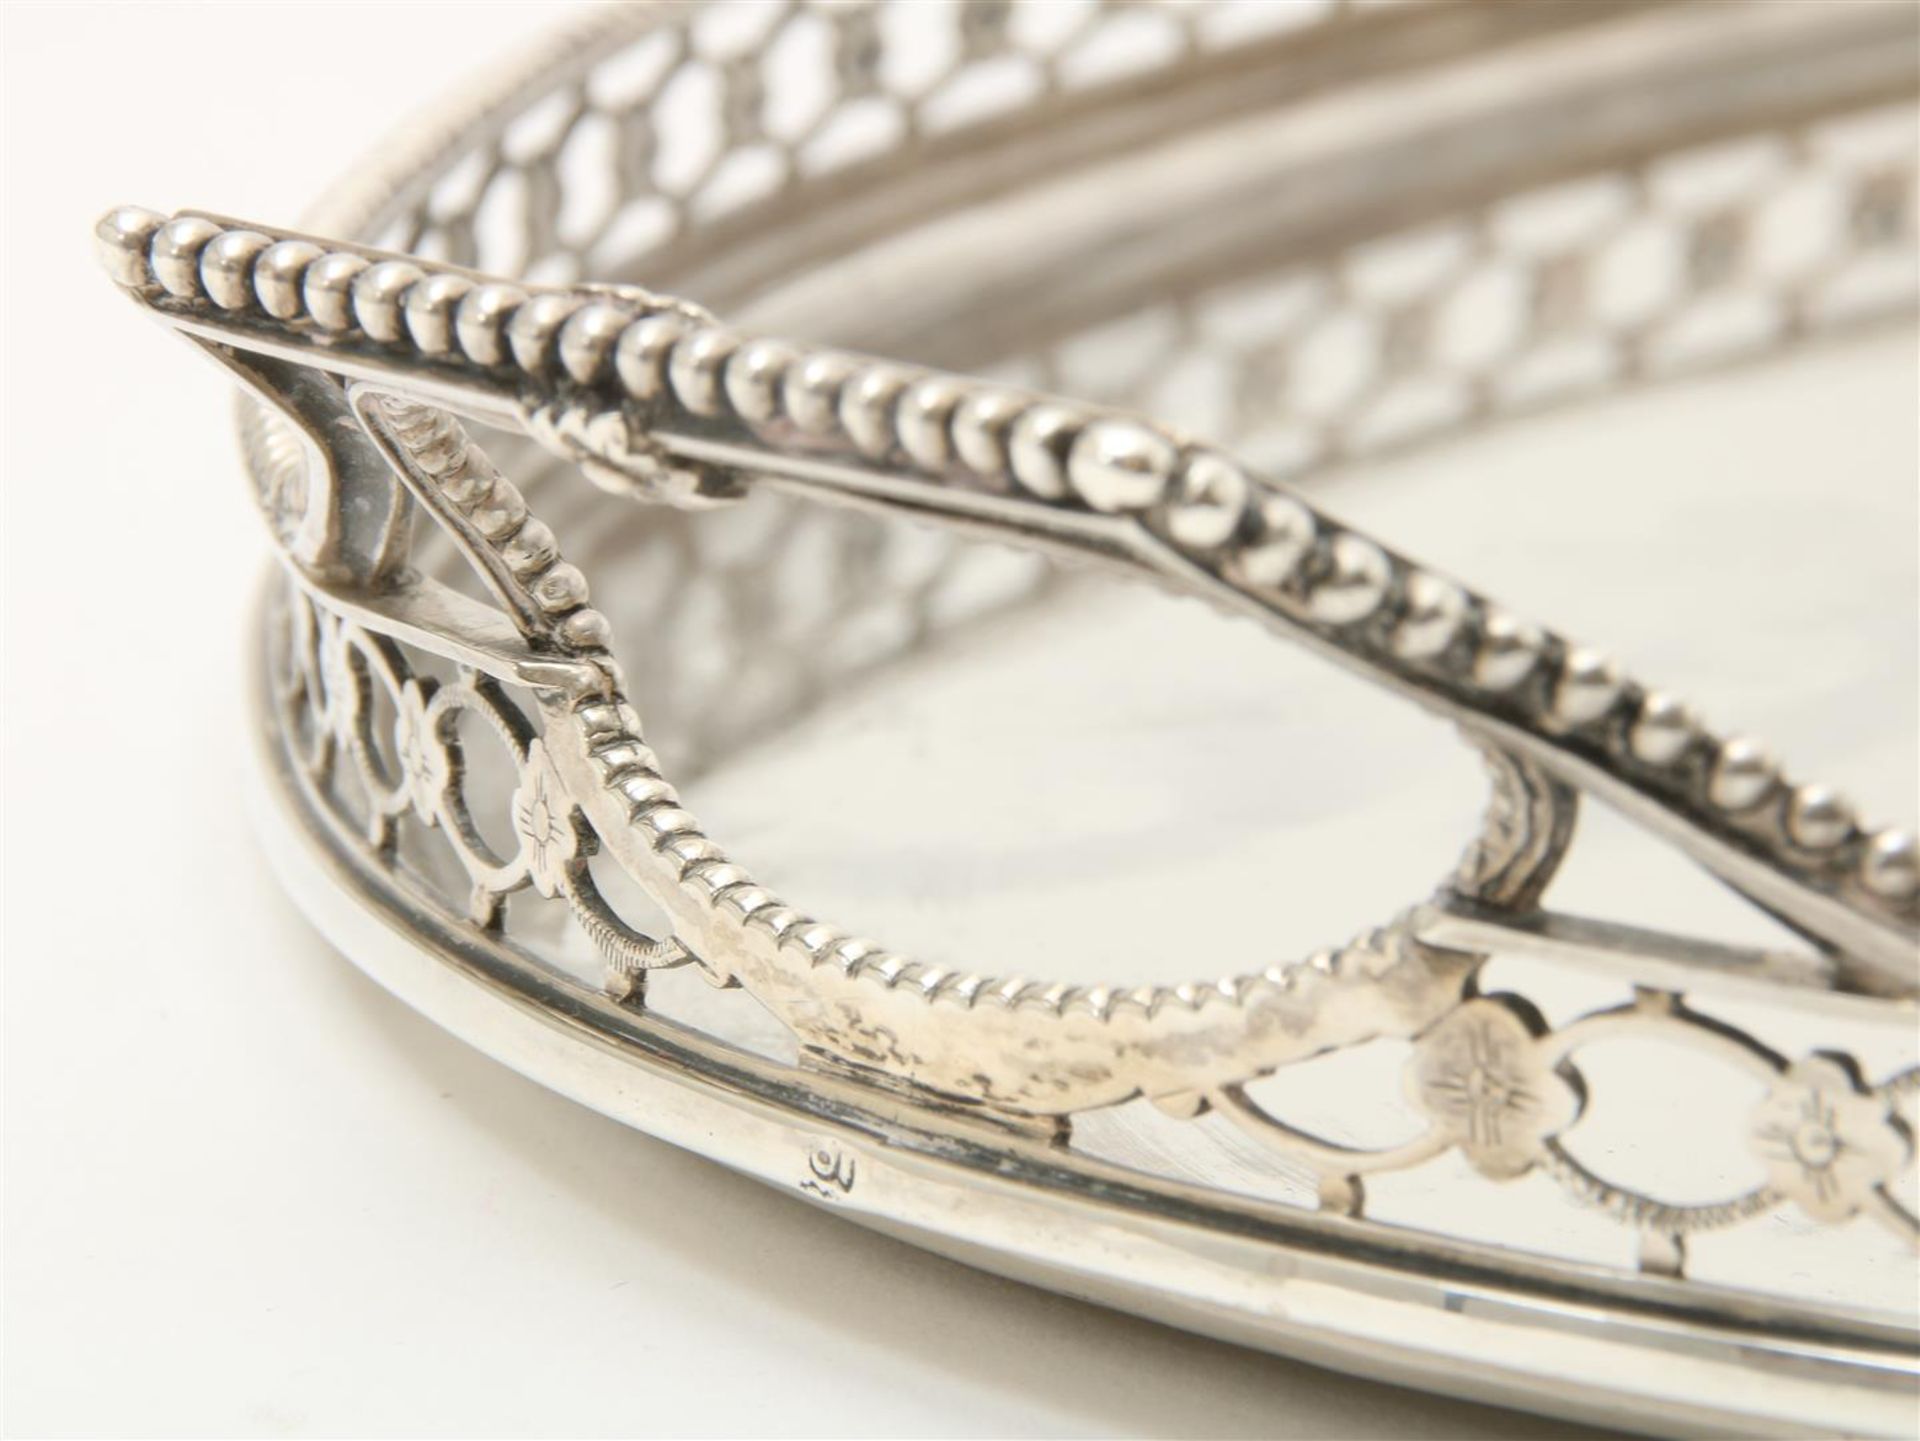 Oval silver tray Amsterdam, Mt. D.W.Rethmeijer, year letter F = 1790, decorated with openwork edge - Image 2 of 4